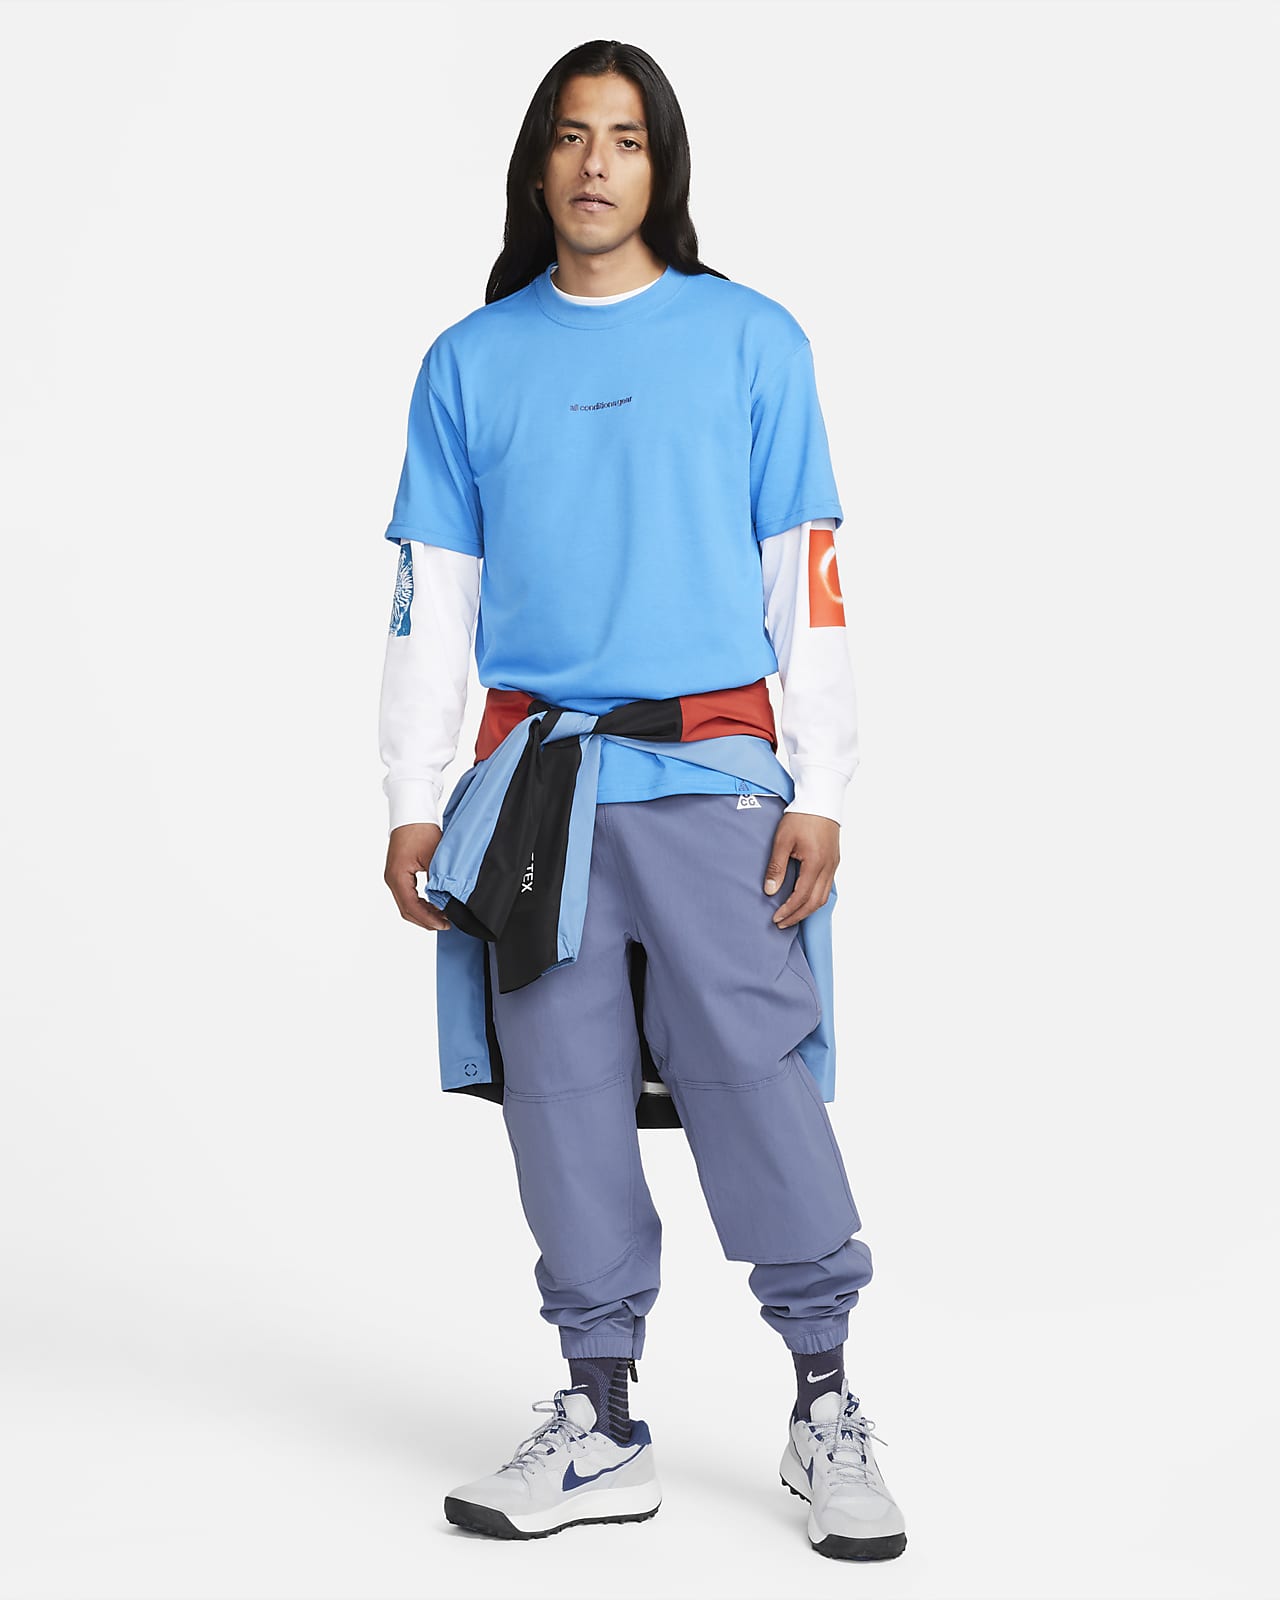 Men's Pants Sale Up to 40% Off | adidas US